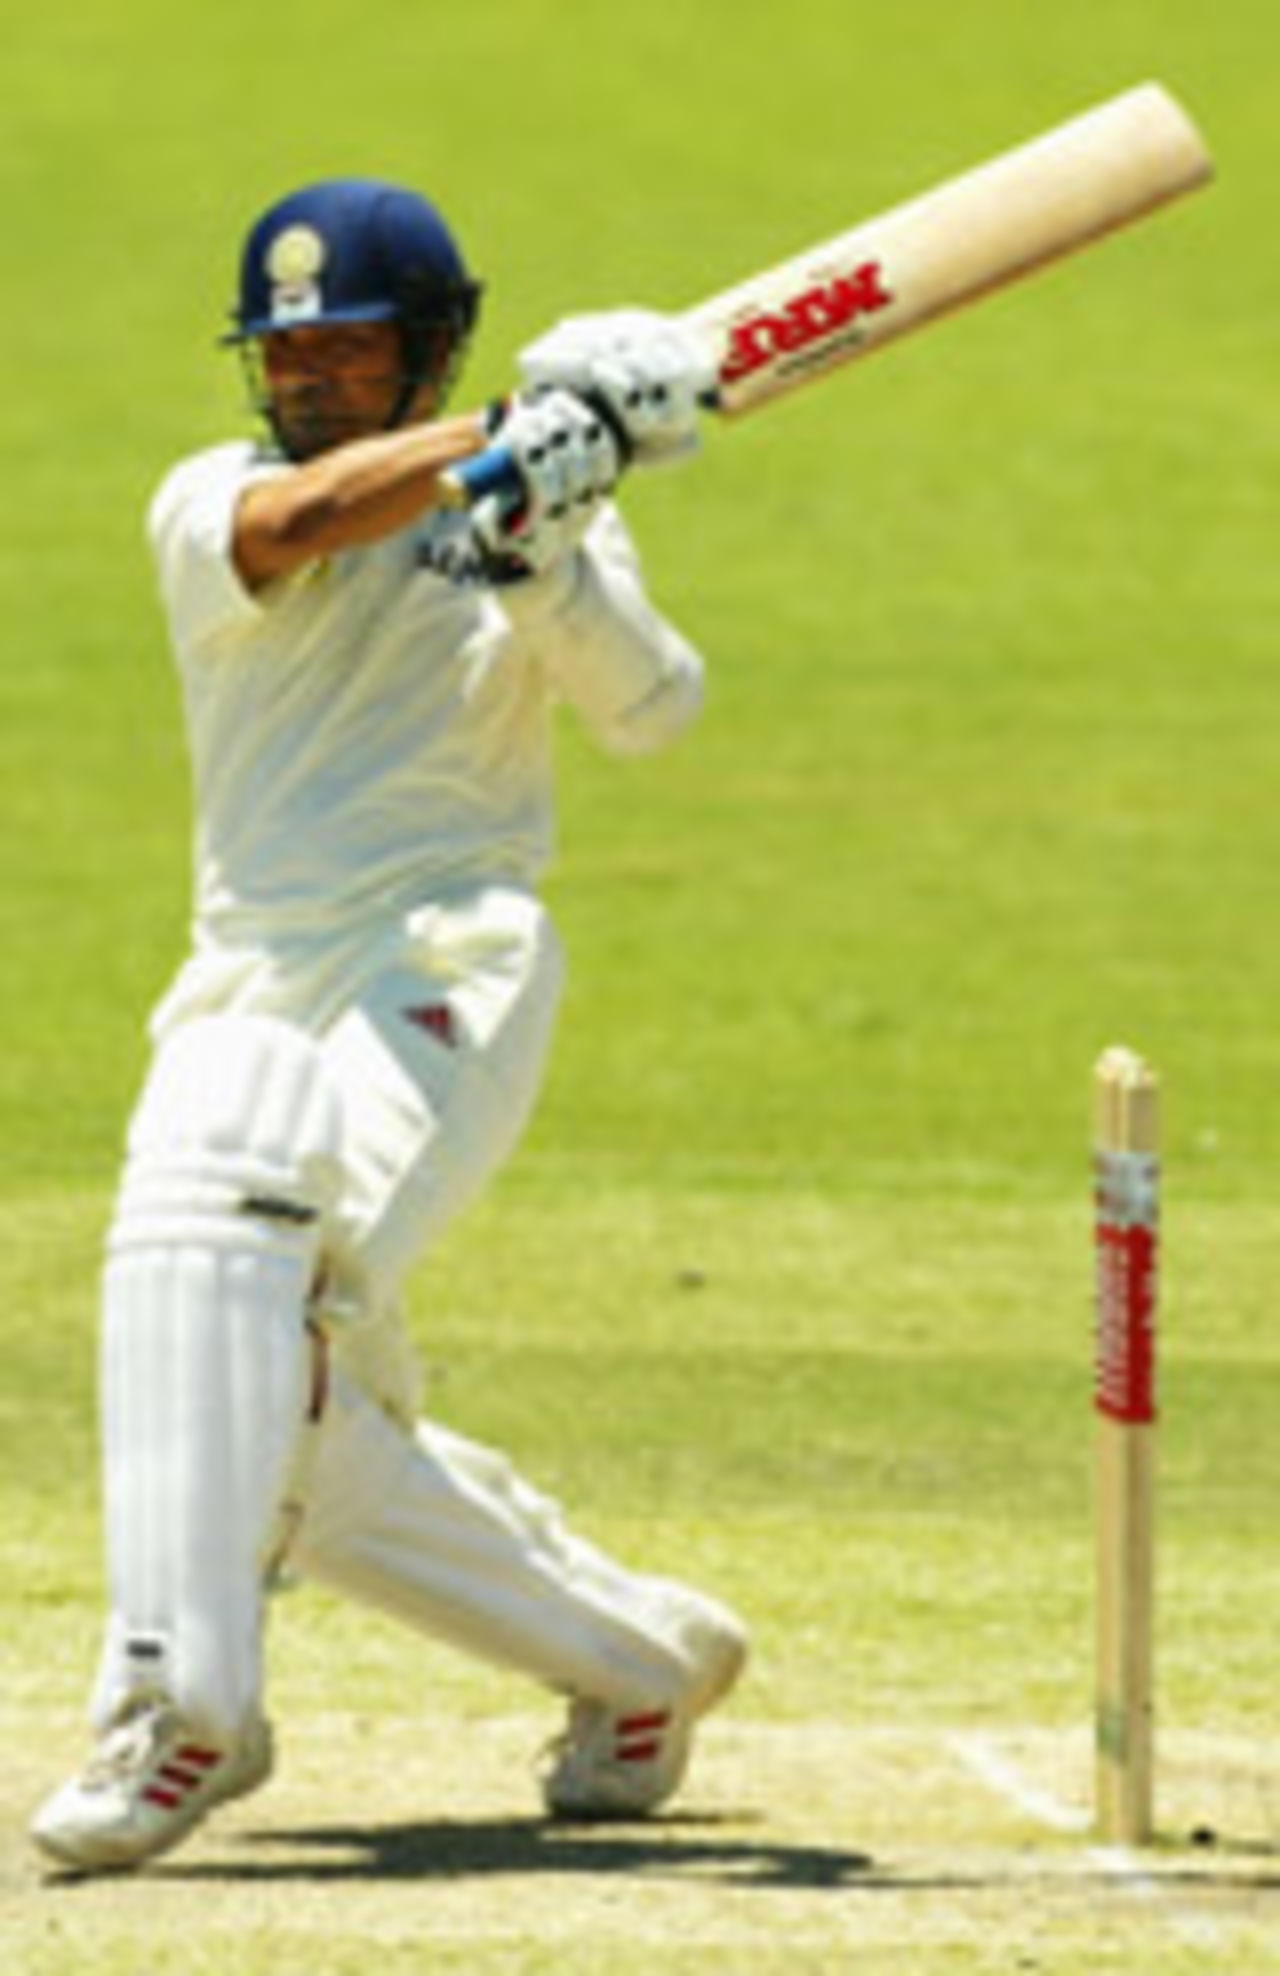 Sachin Tendulkar plays during the run-chase on the fifth day, Australia v India, 2nd Test, Adelaide, 5th day, Dec 15, 2003